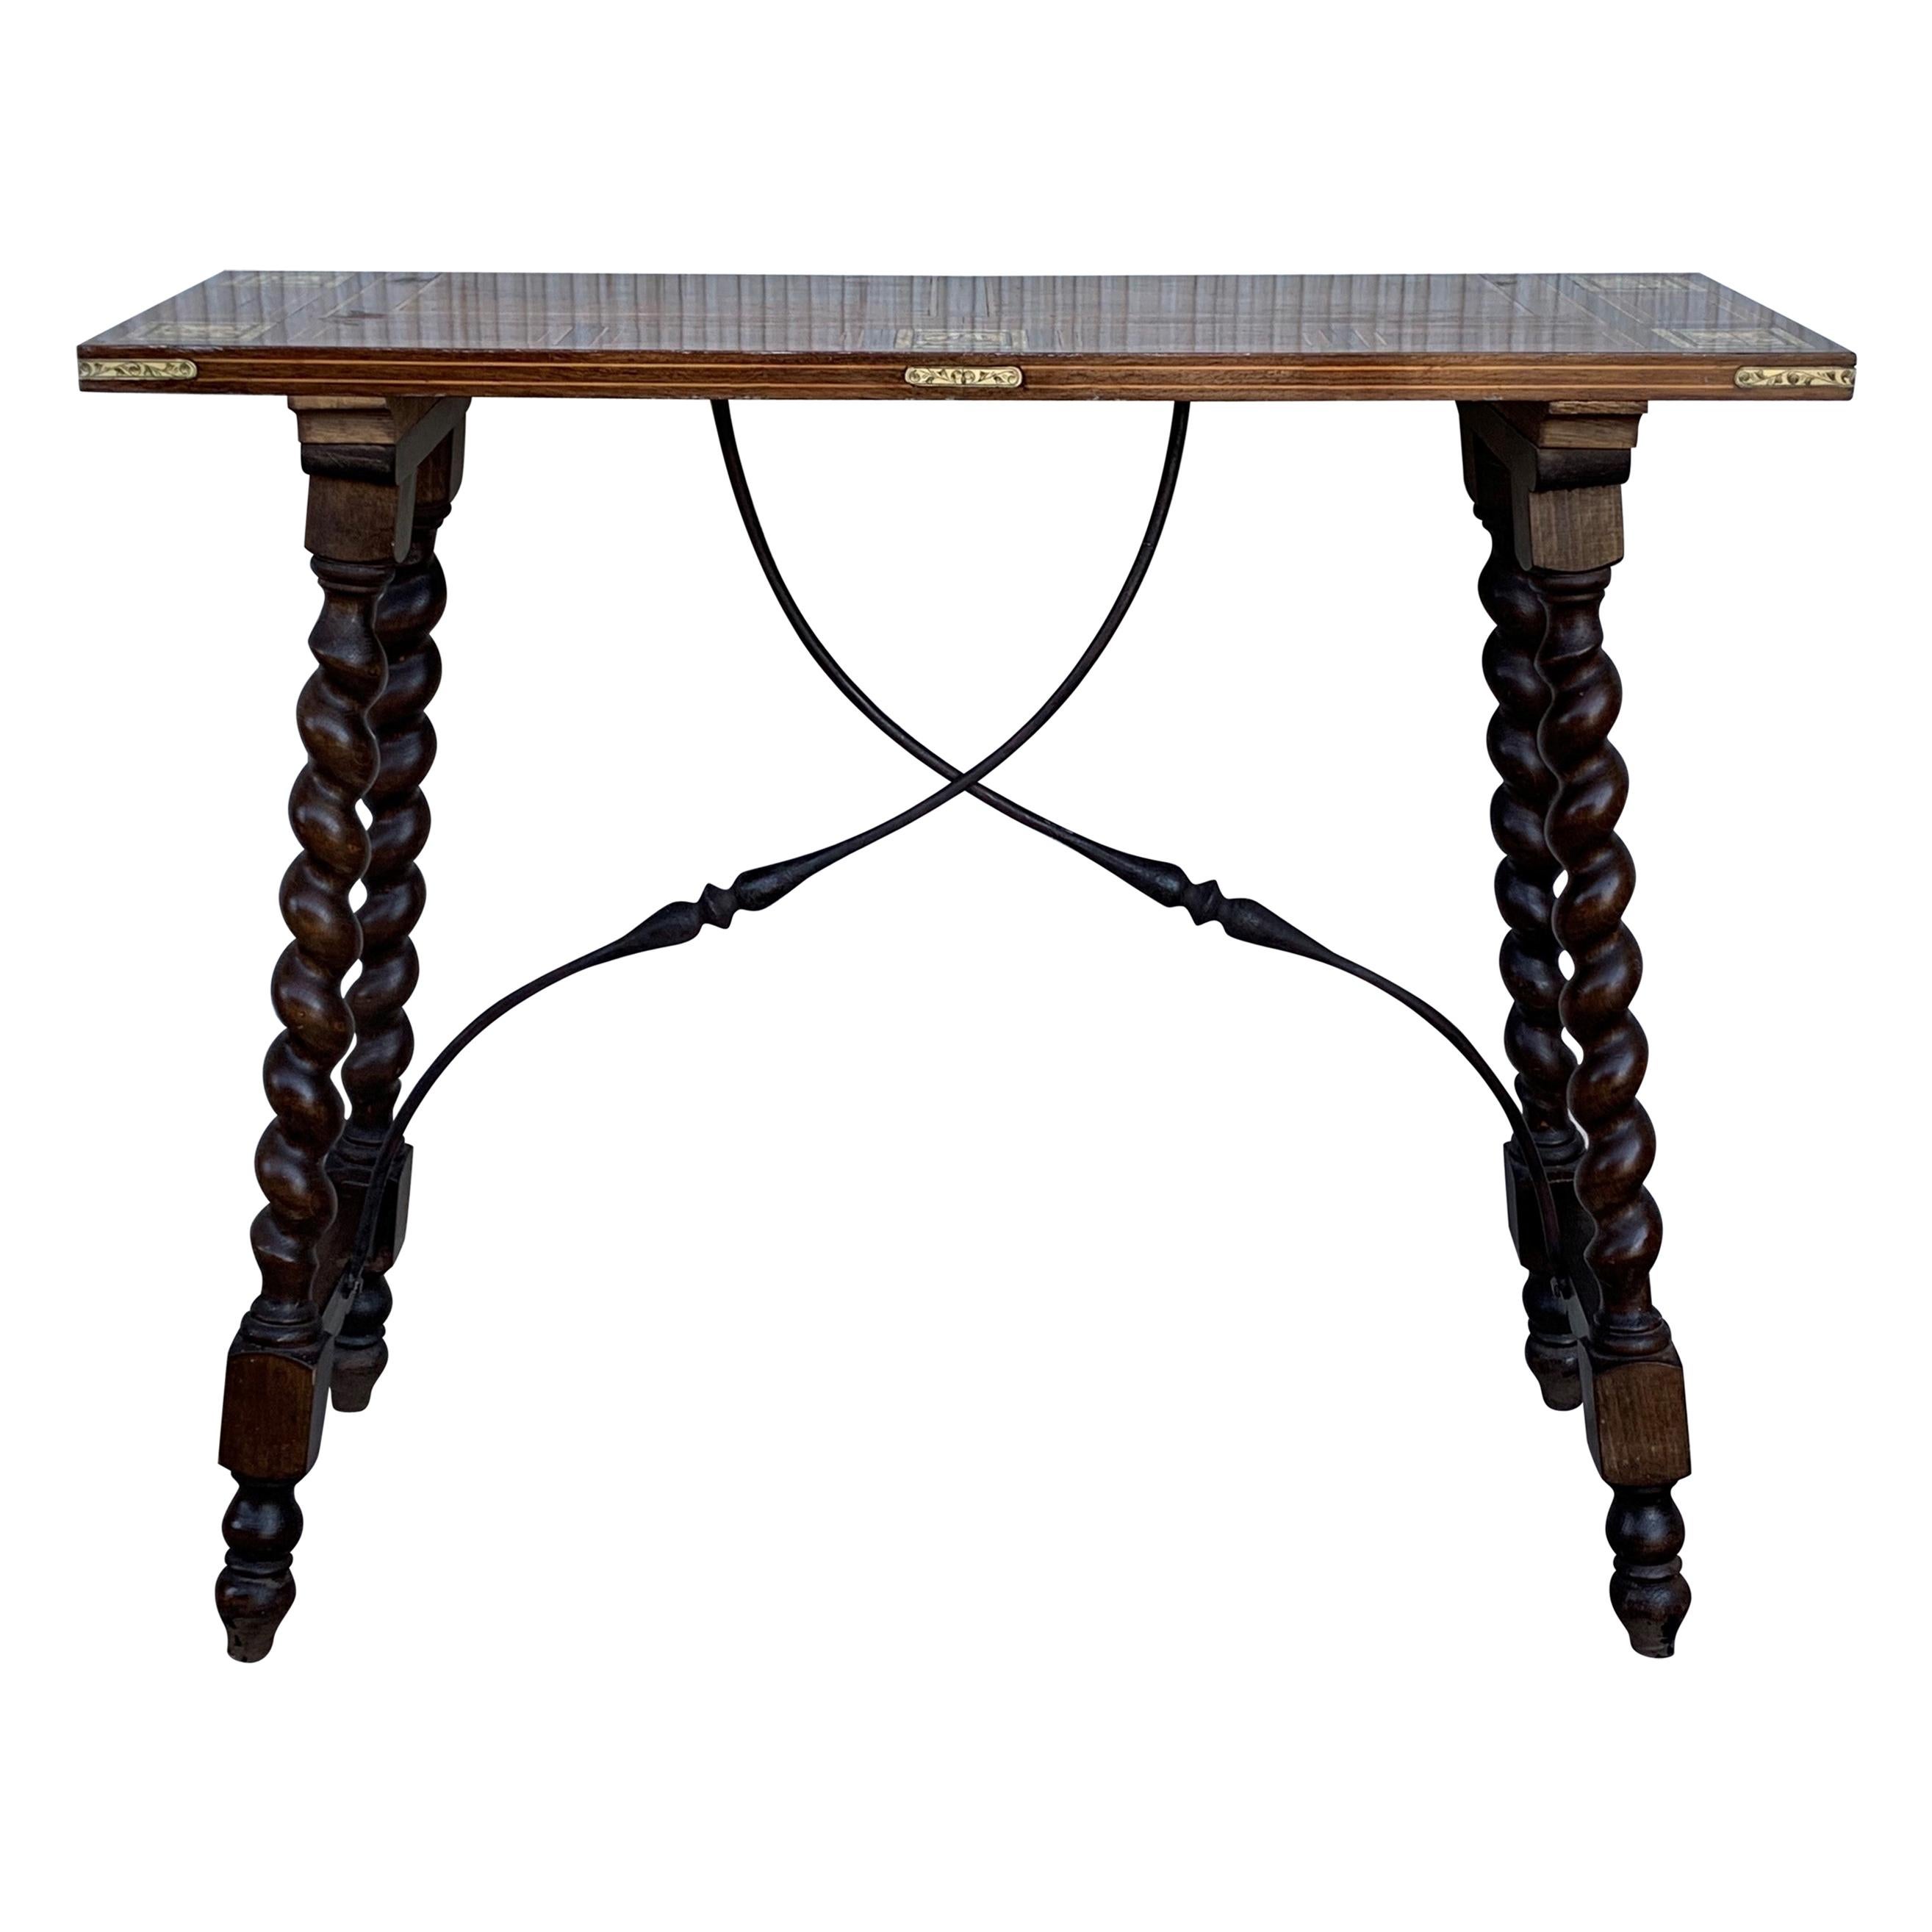 19th Century Salomonic Baroque Side Table with Inlays, Marquetry & Stretchers